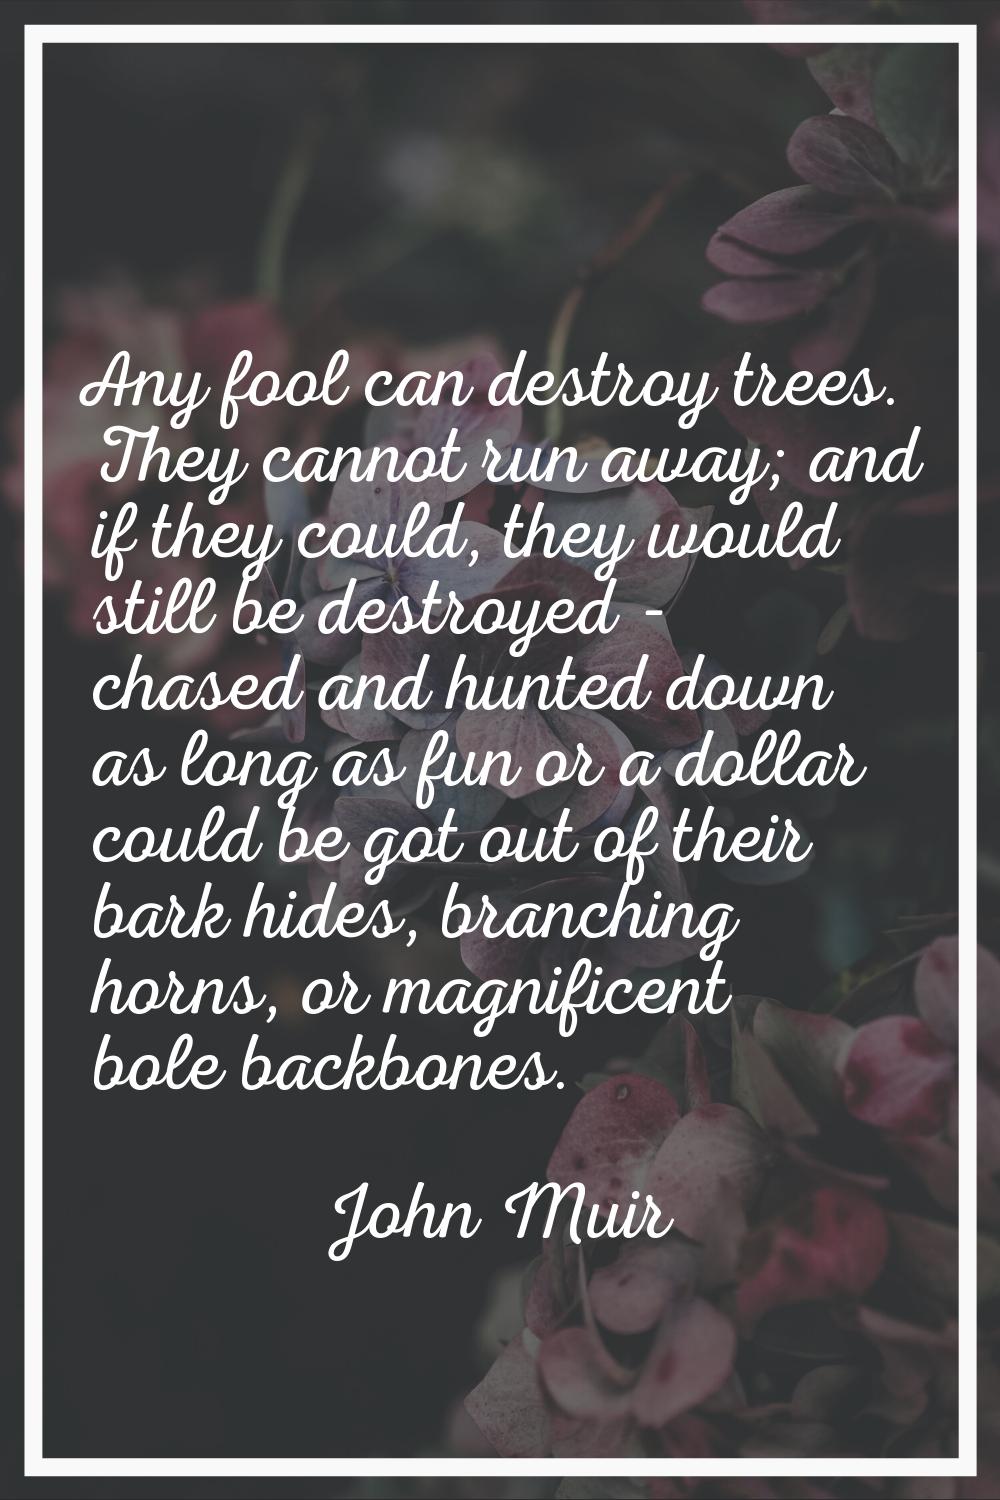 Any fool can destroy trees. They cannot run away; and if they could, they would still be destroyed 